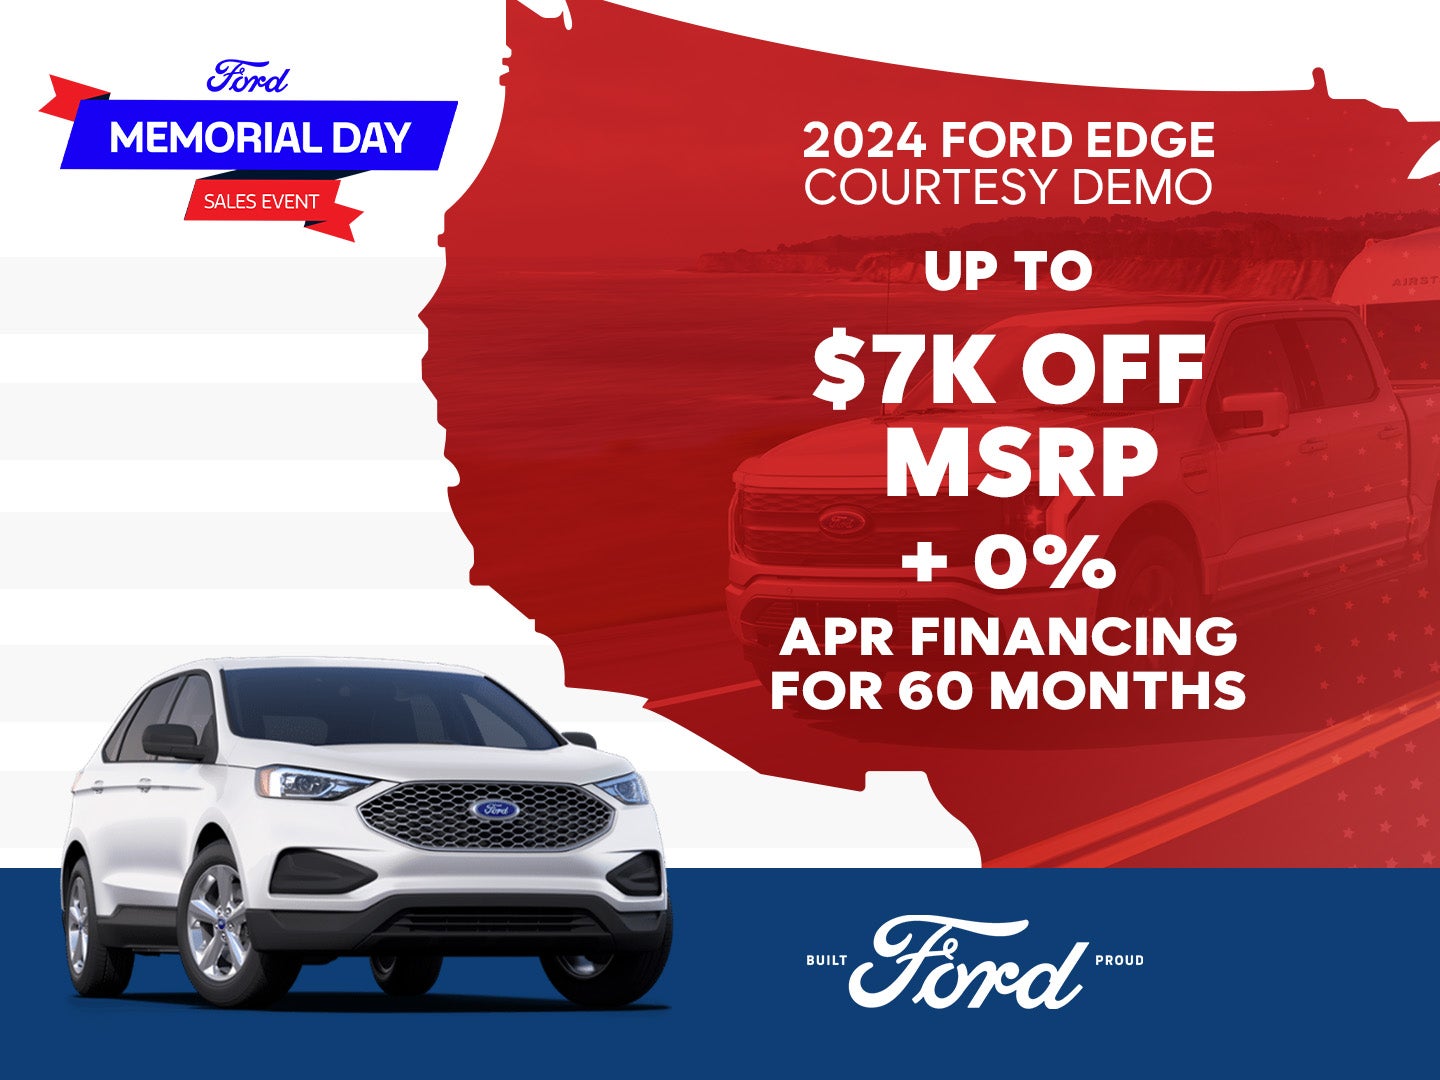 2024 Edge
Courtesy Demo
Up to $7,000 Off + 0% APR for 60 Months